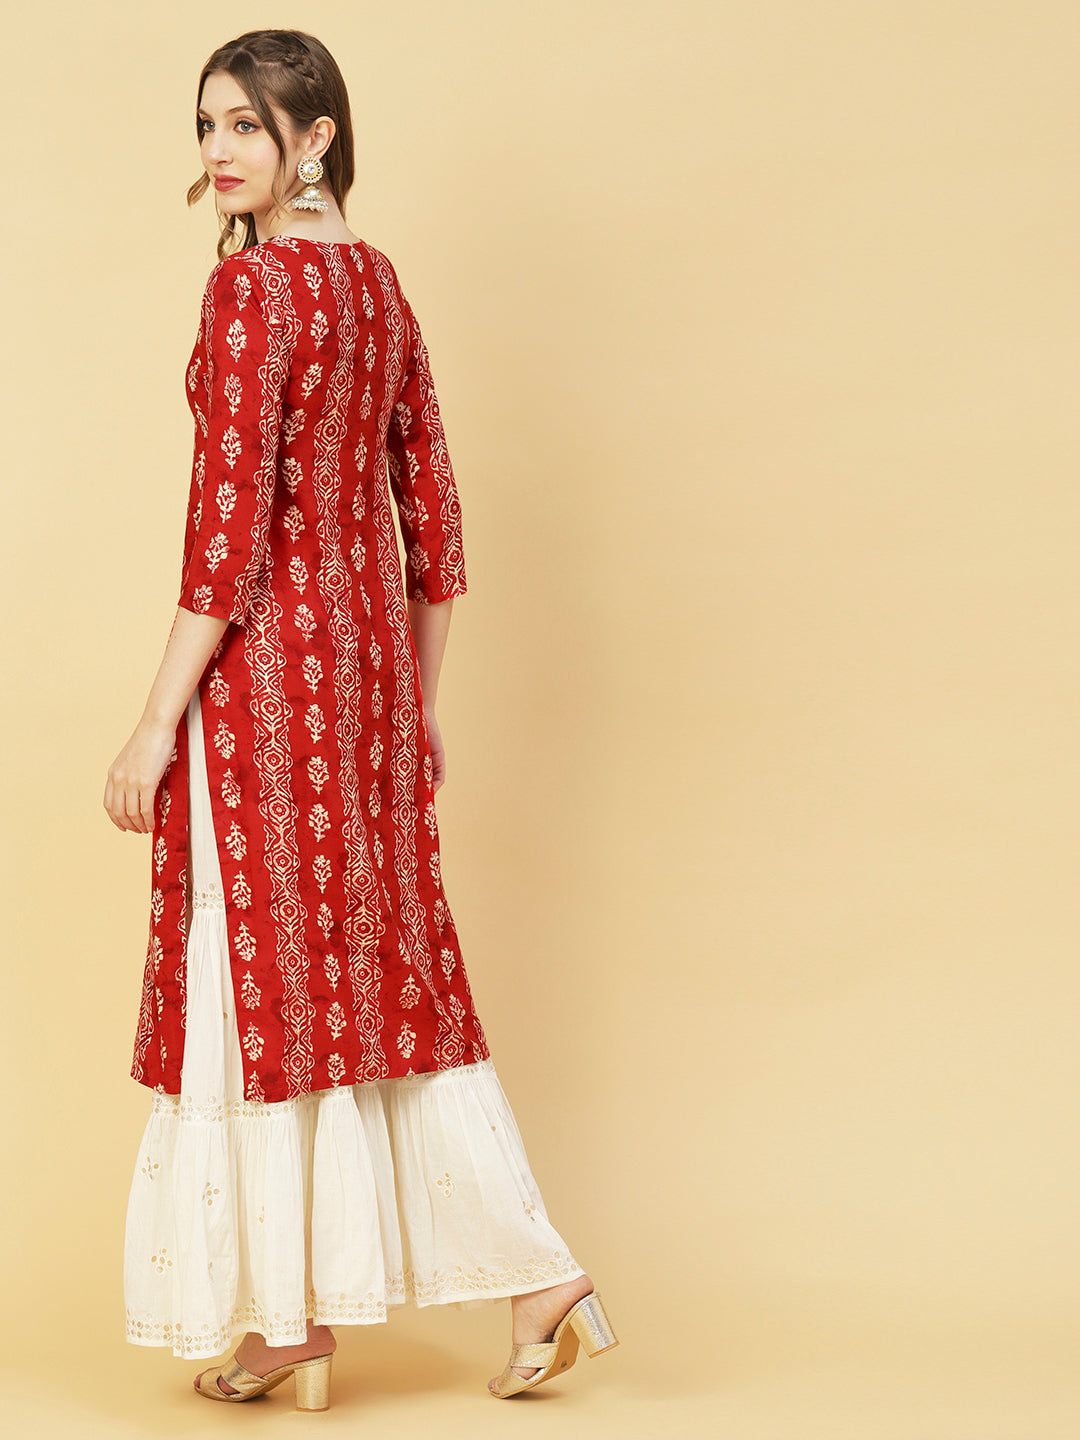 Abstract Foil Printed Mirror, Cutdana & Pearl Embroidered Kurta - Red